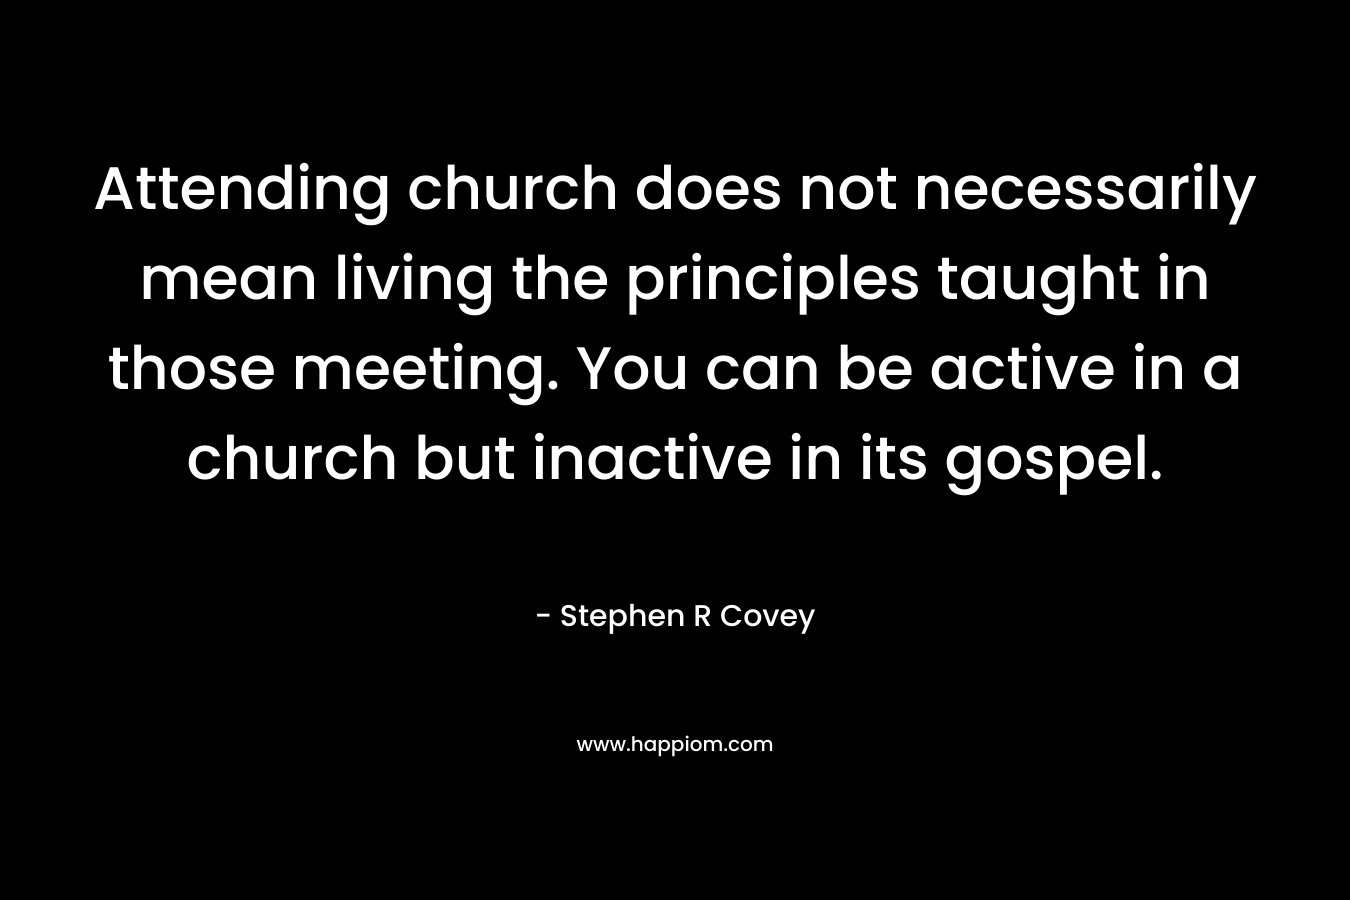 Attending church does not necessarily mean living the principles taught in those meeting. You can be active in a church but inactive in its gospel.